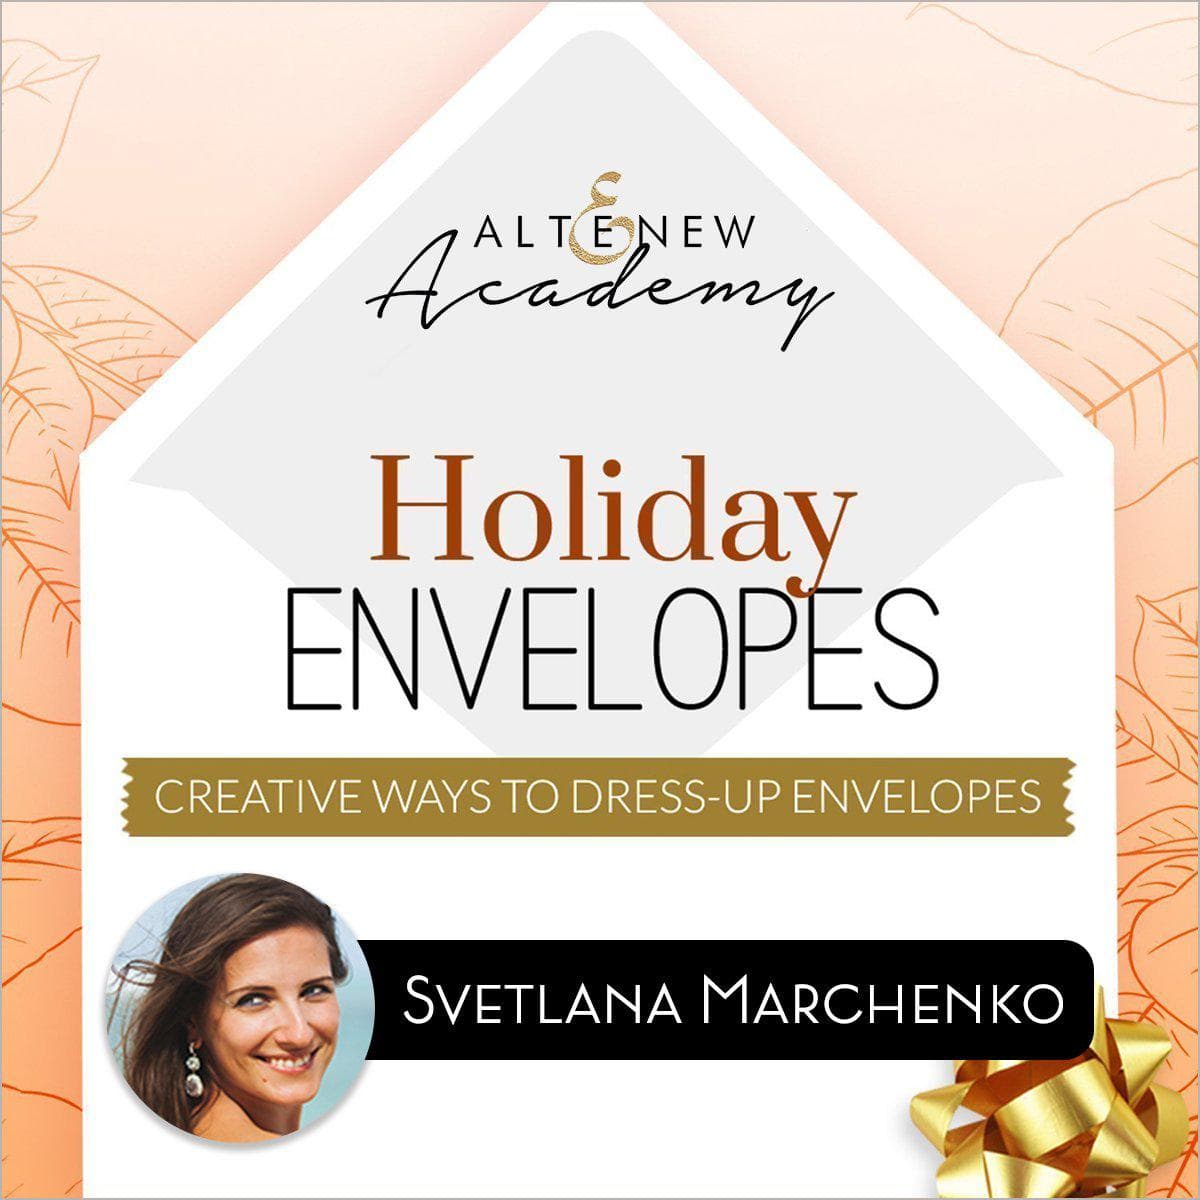 Altenew Class Holiday Envelopes - Creative Ways to Dress-up Envelopes Online Cardmaking Class